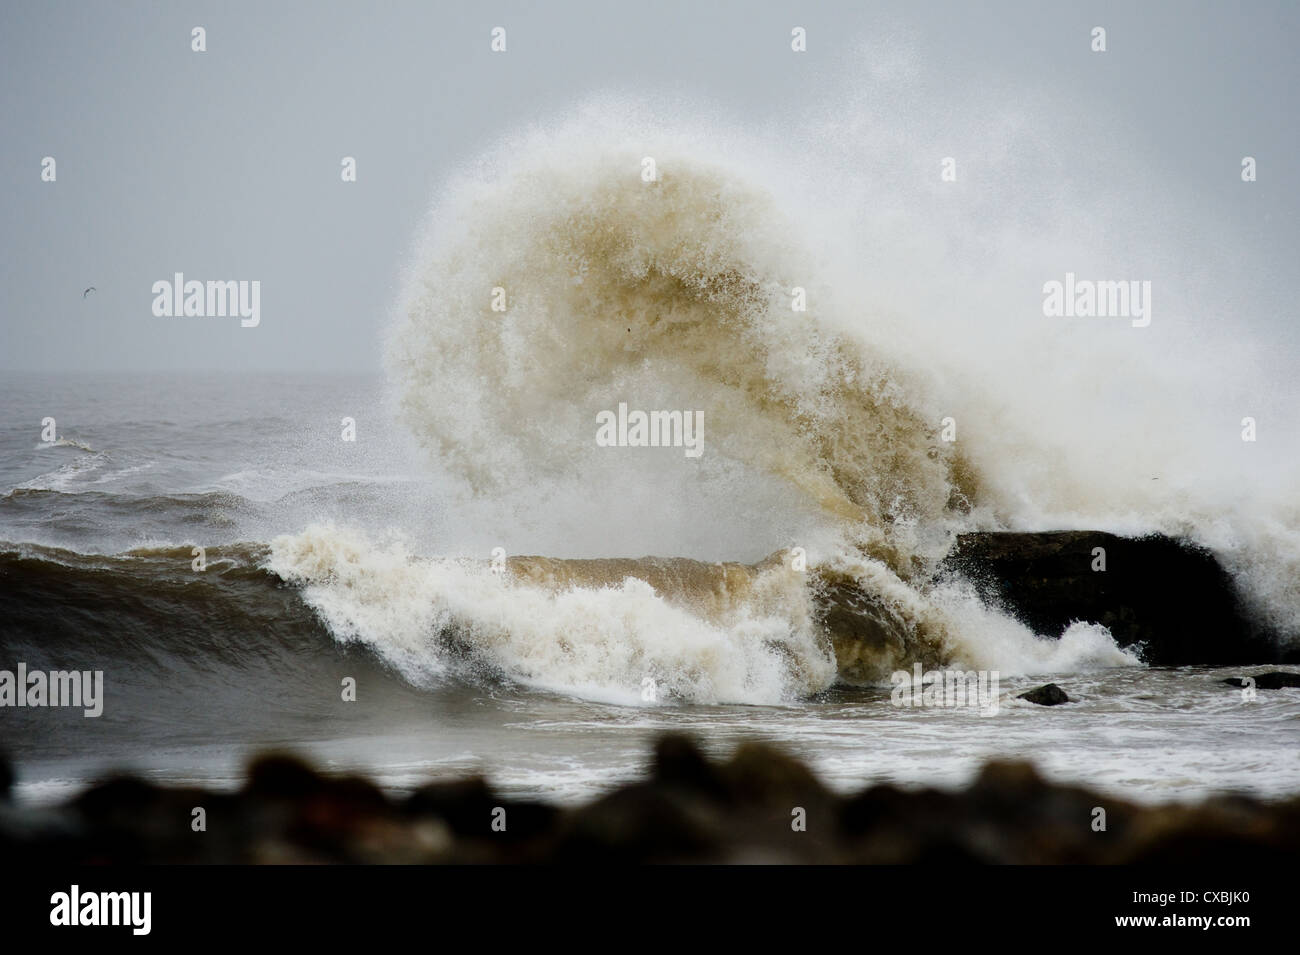 Waves crash over rocks in an area known as South Gare on Teesside in England as heavy seas lash the coastline. Stock Photo